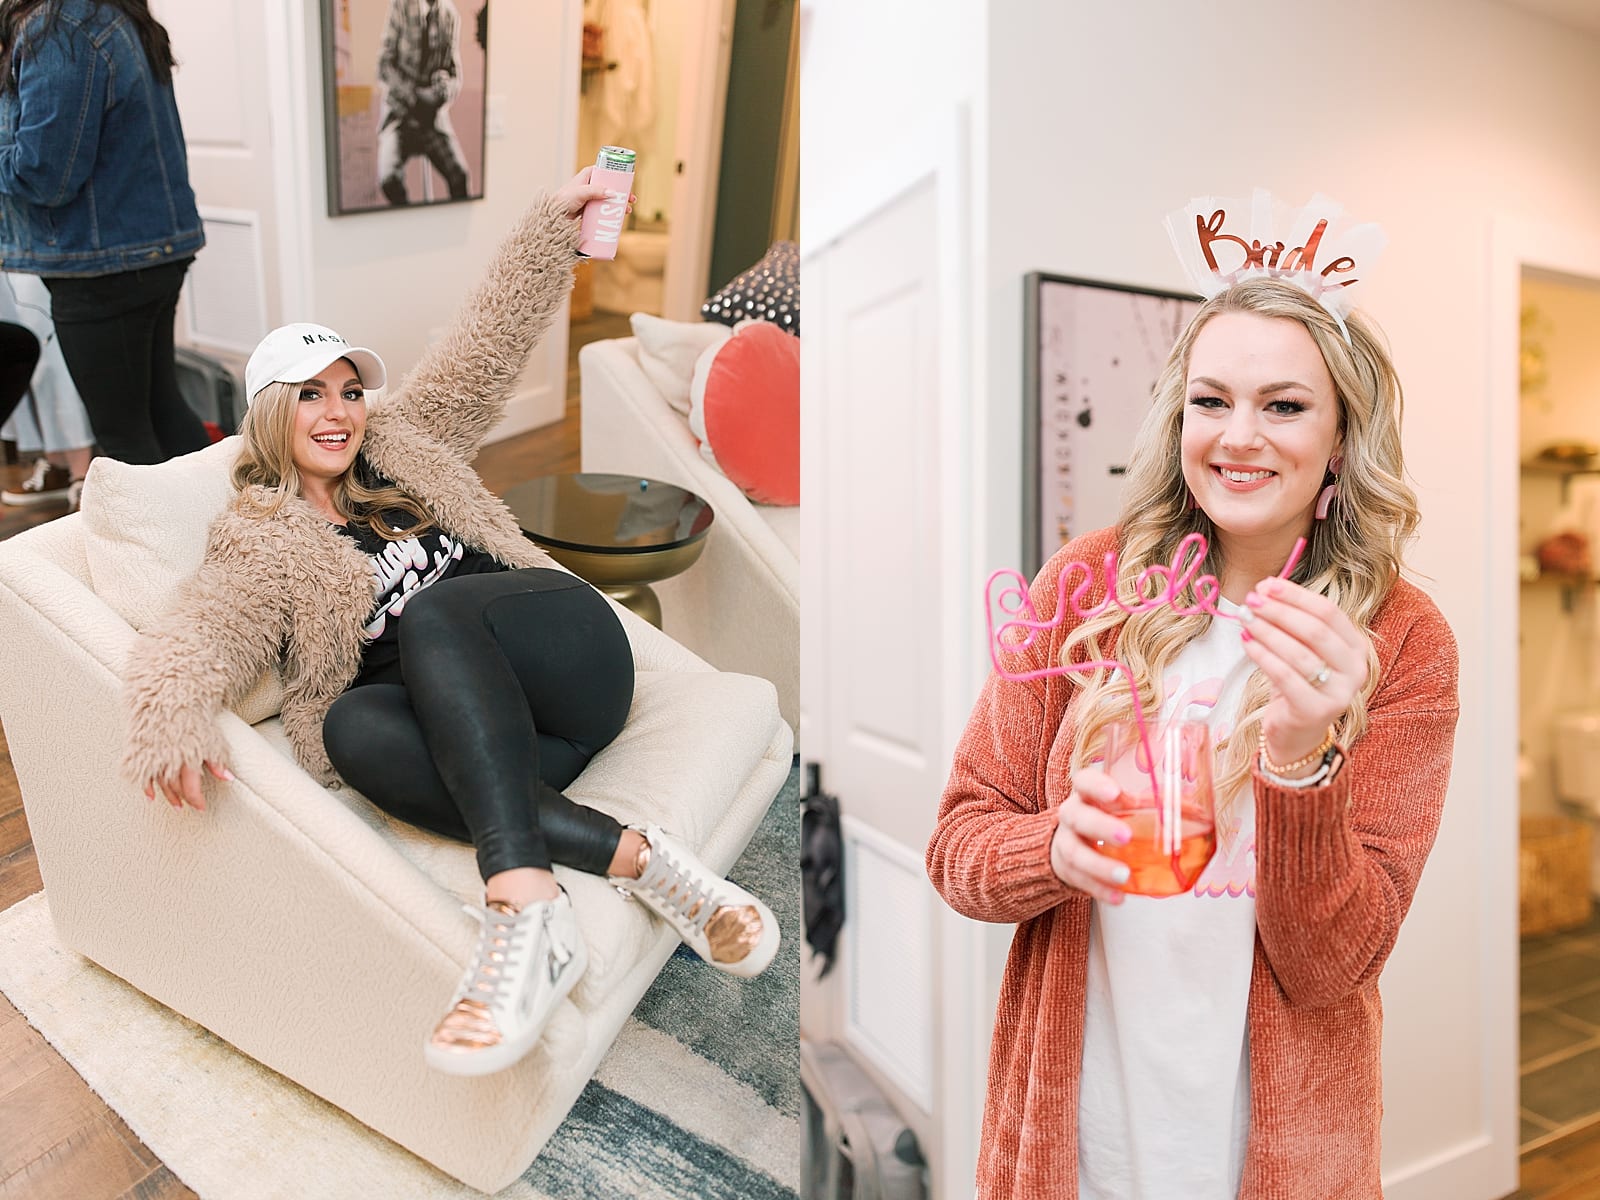 Girl lounging on couch holding up drink and bride drinking a cocktail photos